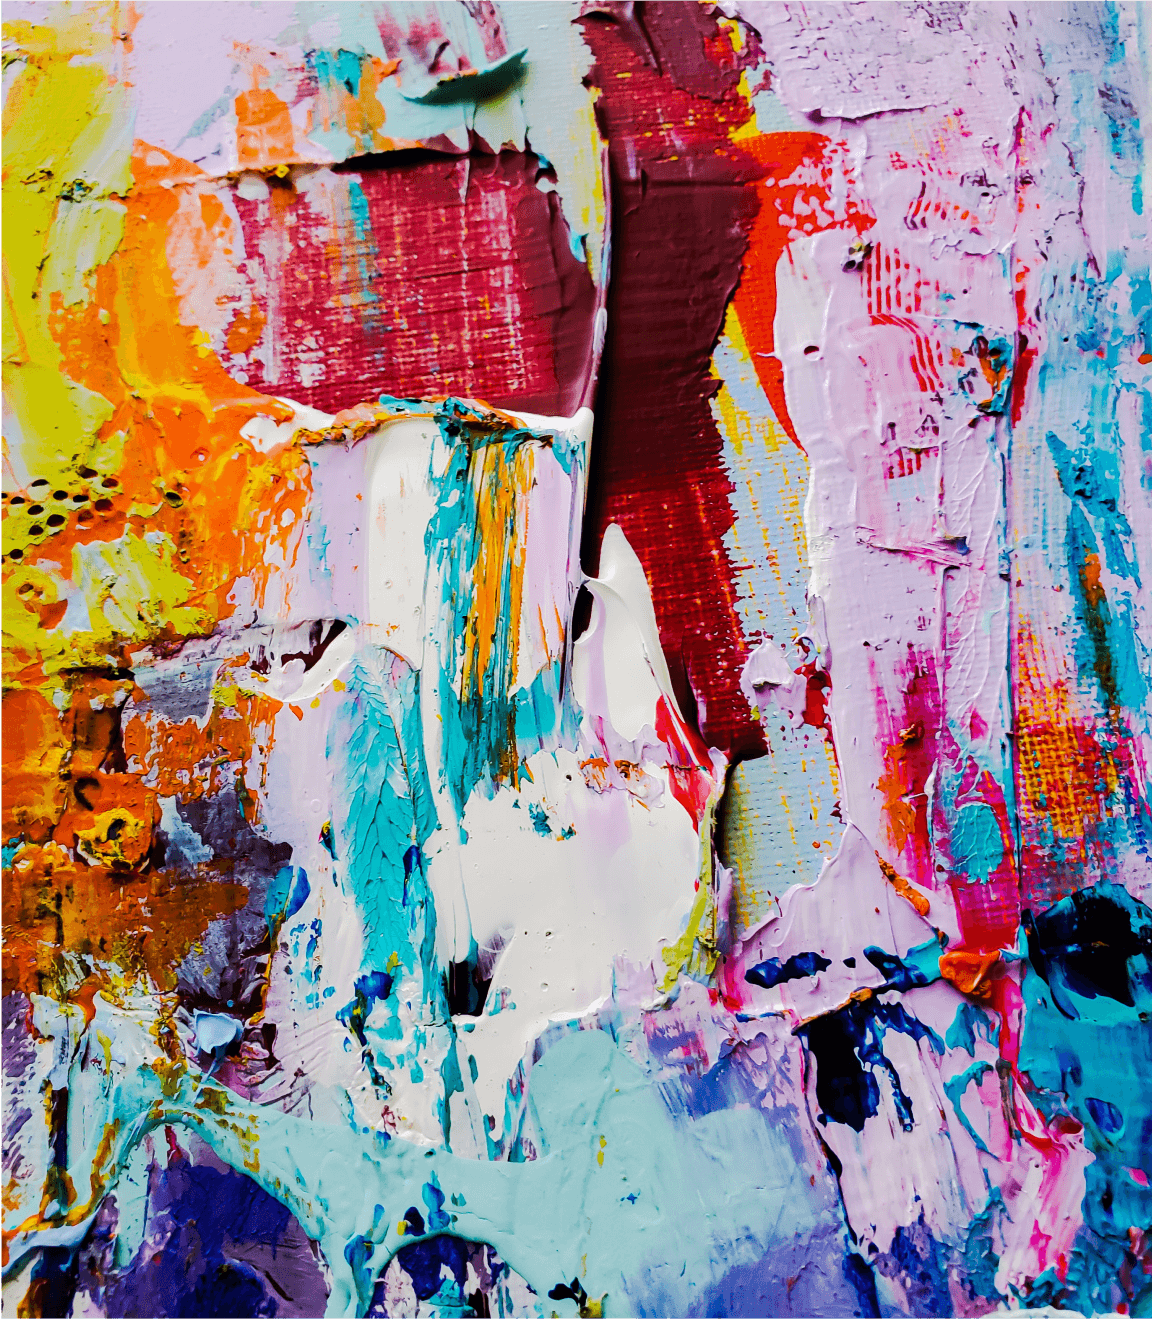 An abstract painting showcasing vibrant colors and expressive brushstrokes.